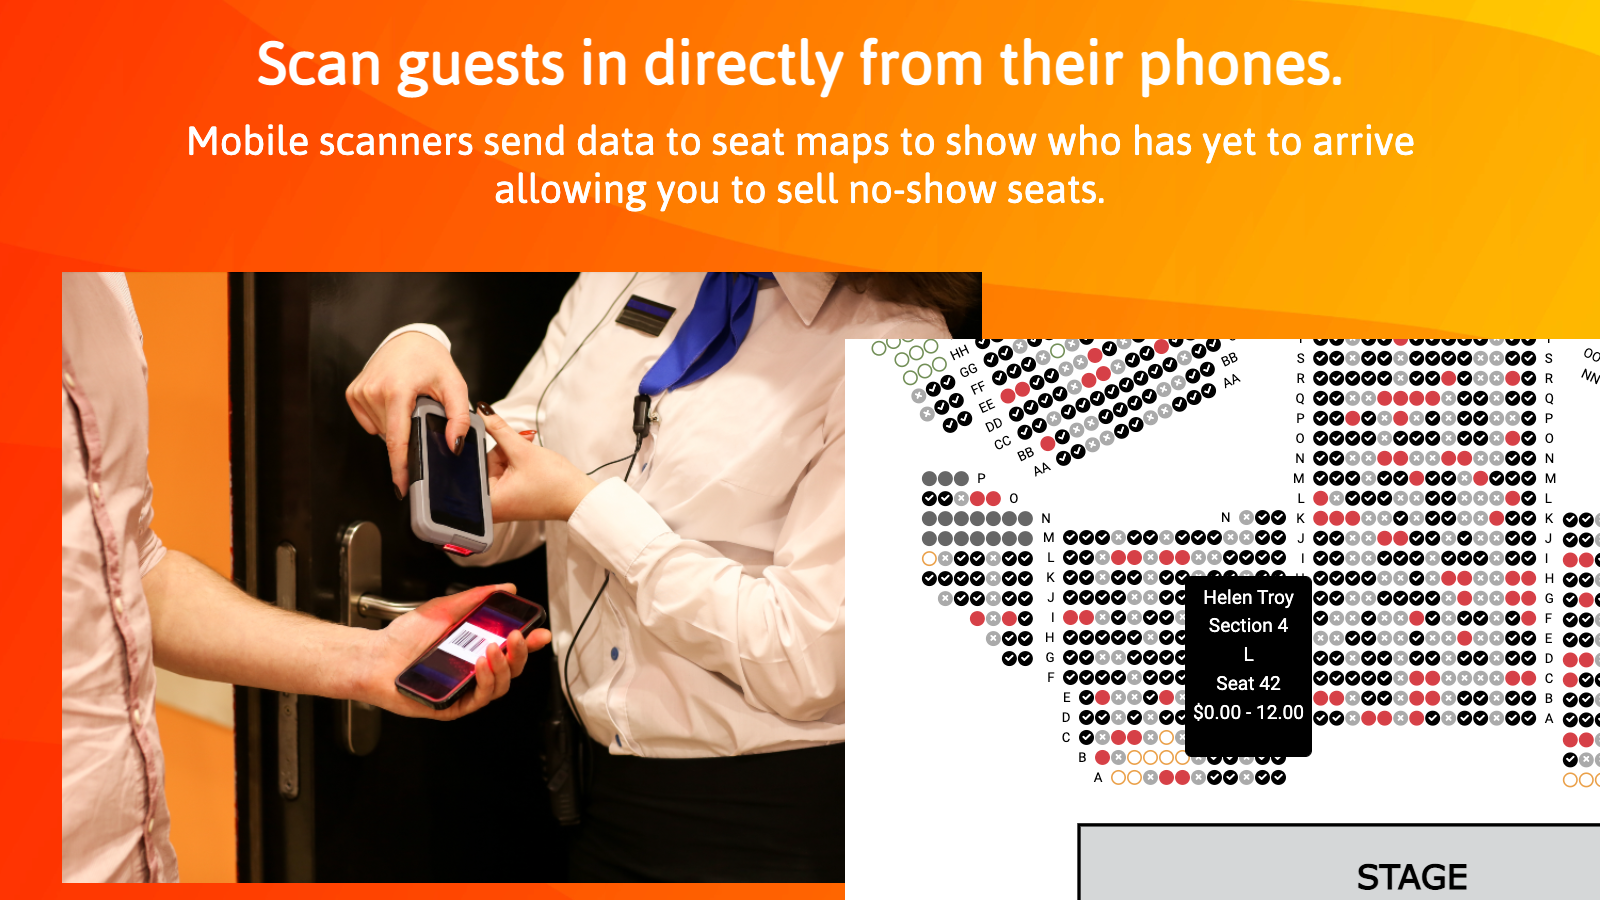 ThunderTix Software - Streamline your checkin process by scanning tickets using our iOS or Android Apps. See real-time updates to your seating chart showing which seats have not checked in.